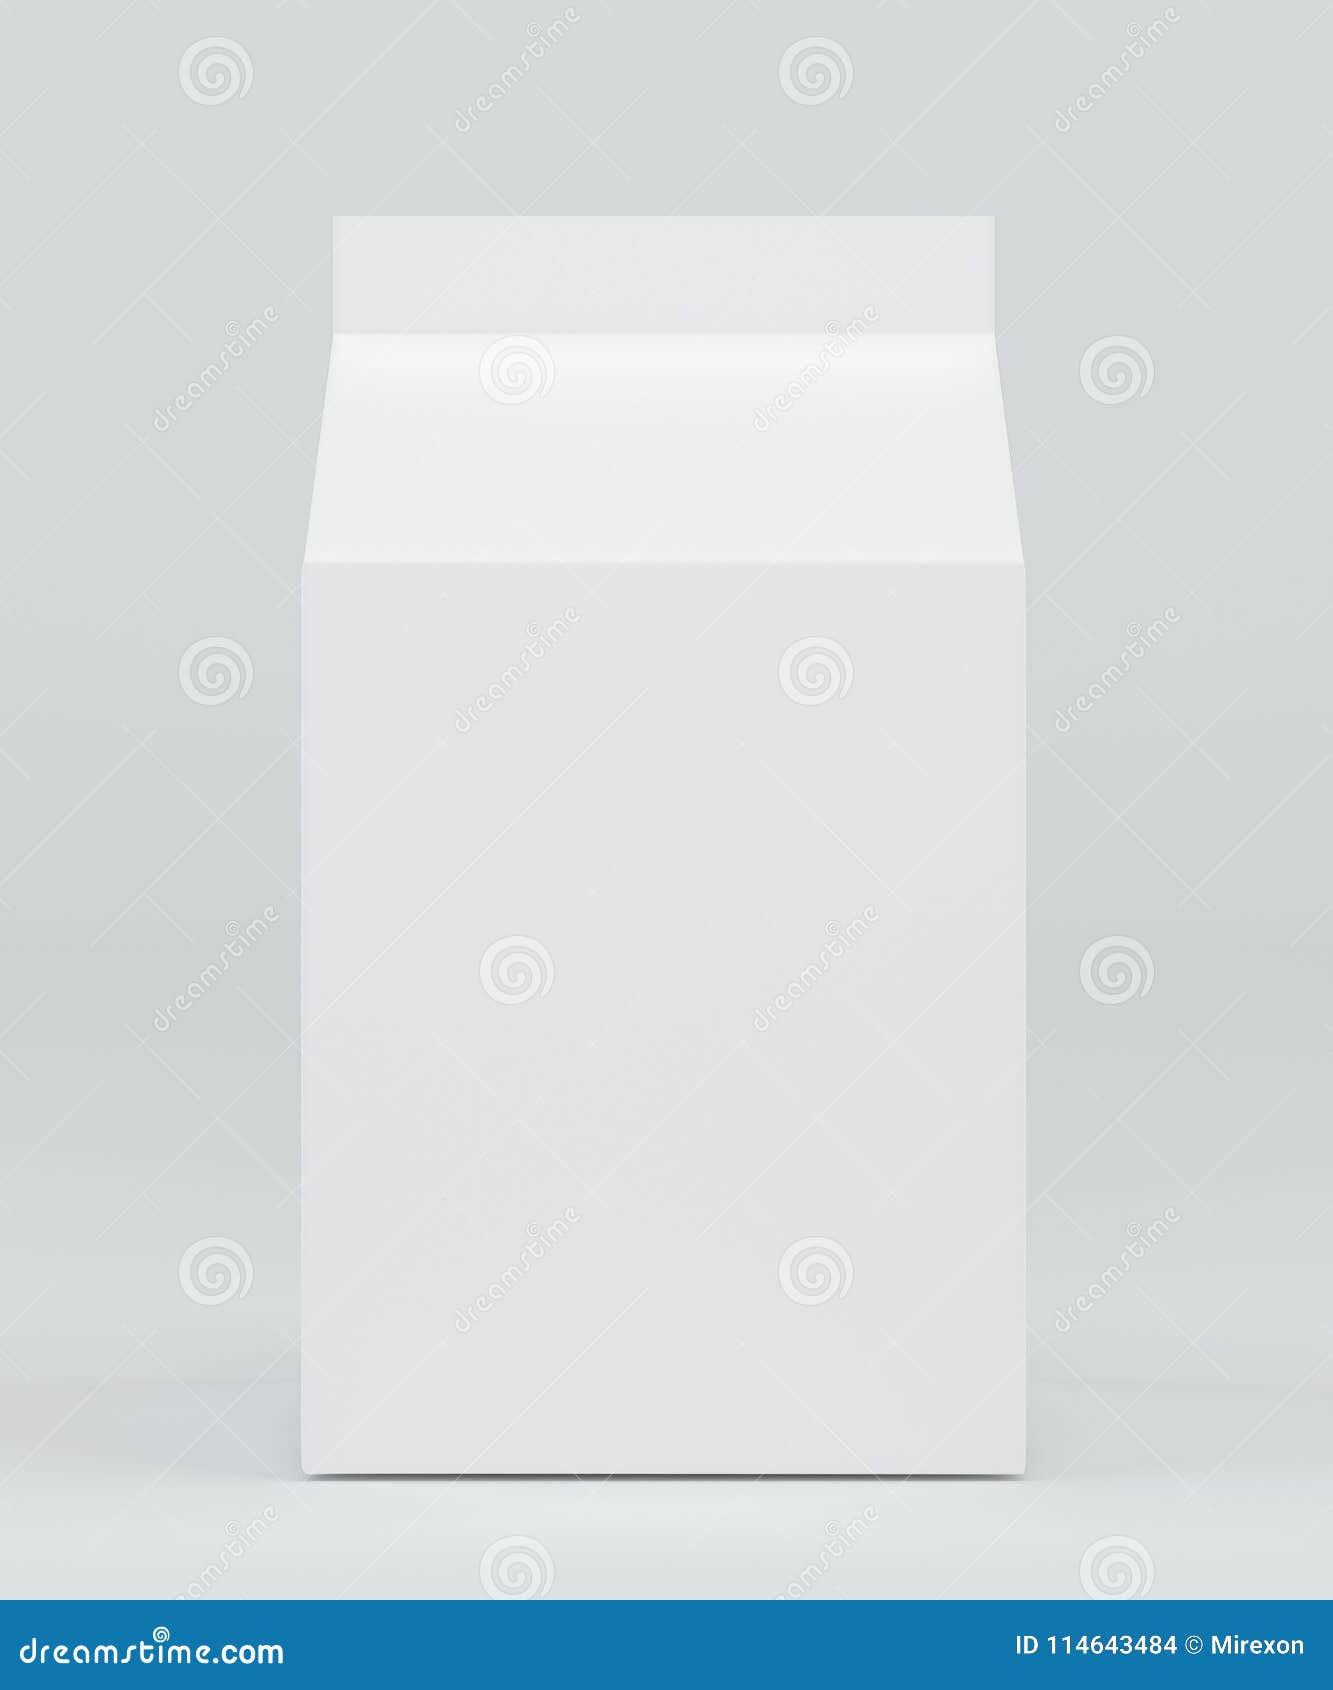 Download Milk Box Front View Carton Box Mock Up White Clear Empty Box 3d Rendering Stock Illustration Illustration Of Bottle Business 114643484